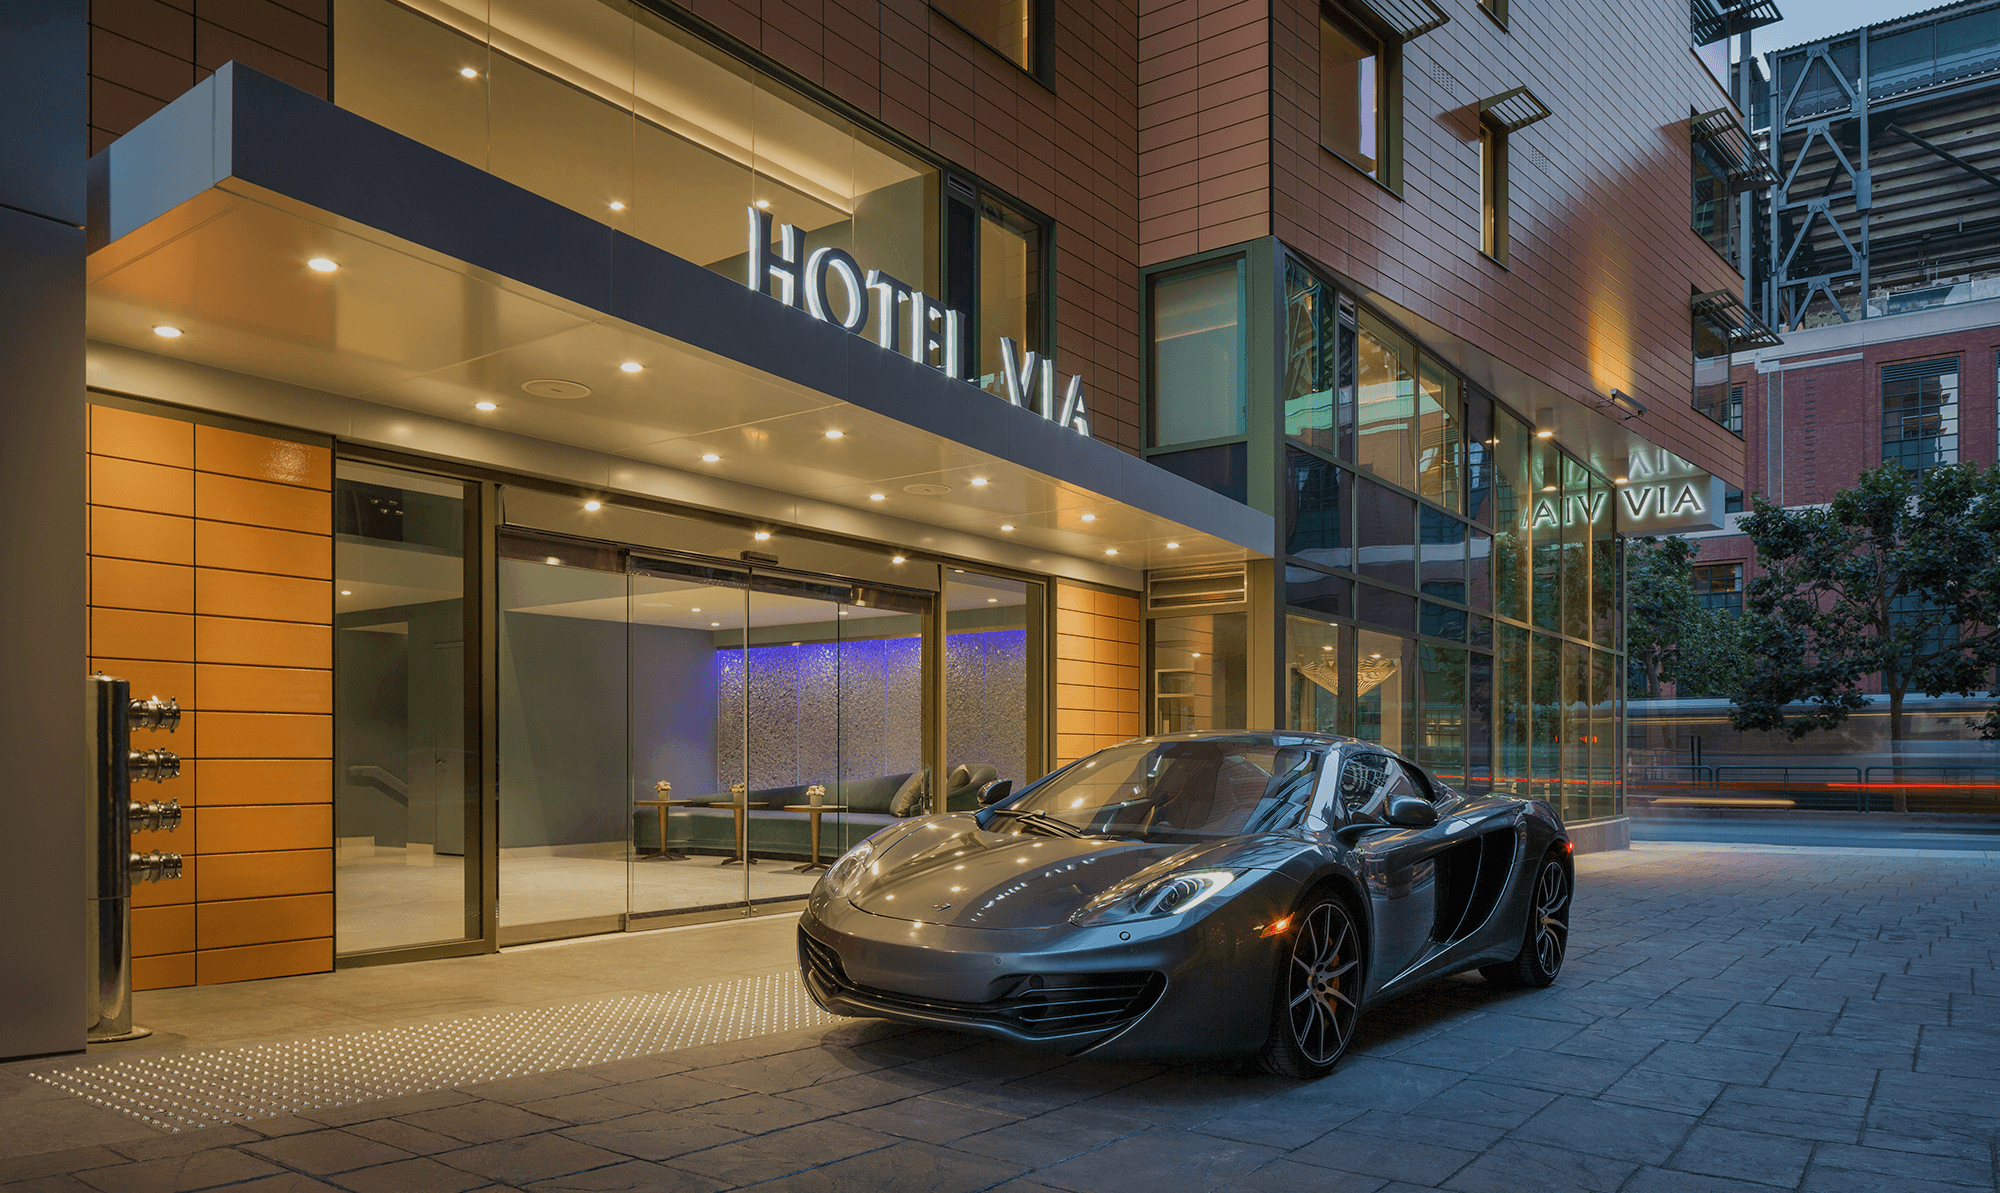 A sports car parked in front of a hotel near Chase Center.